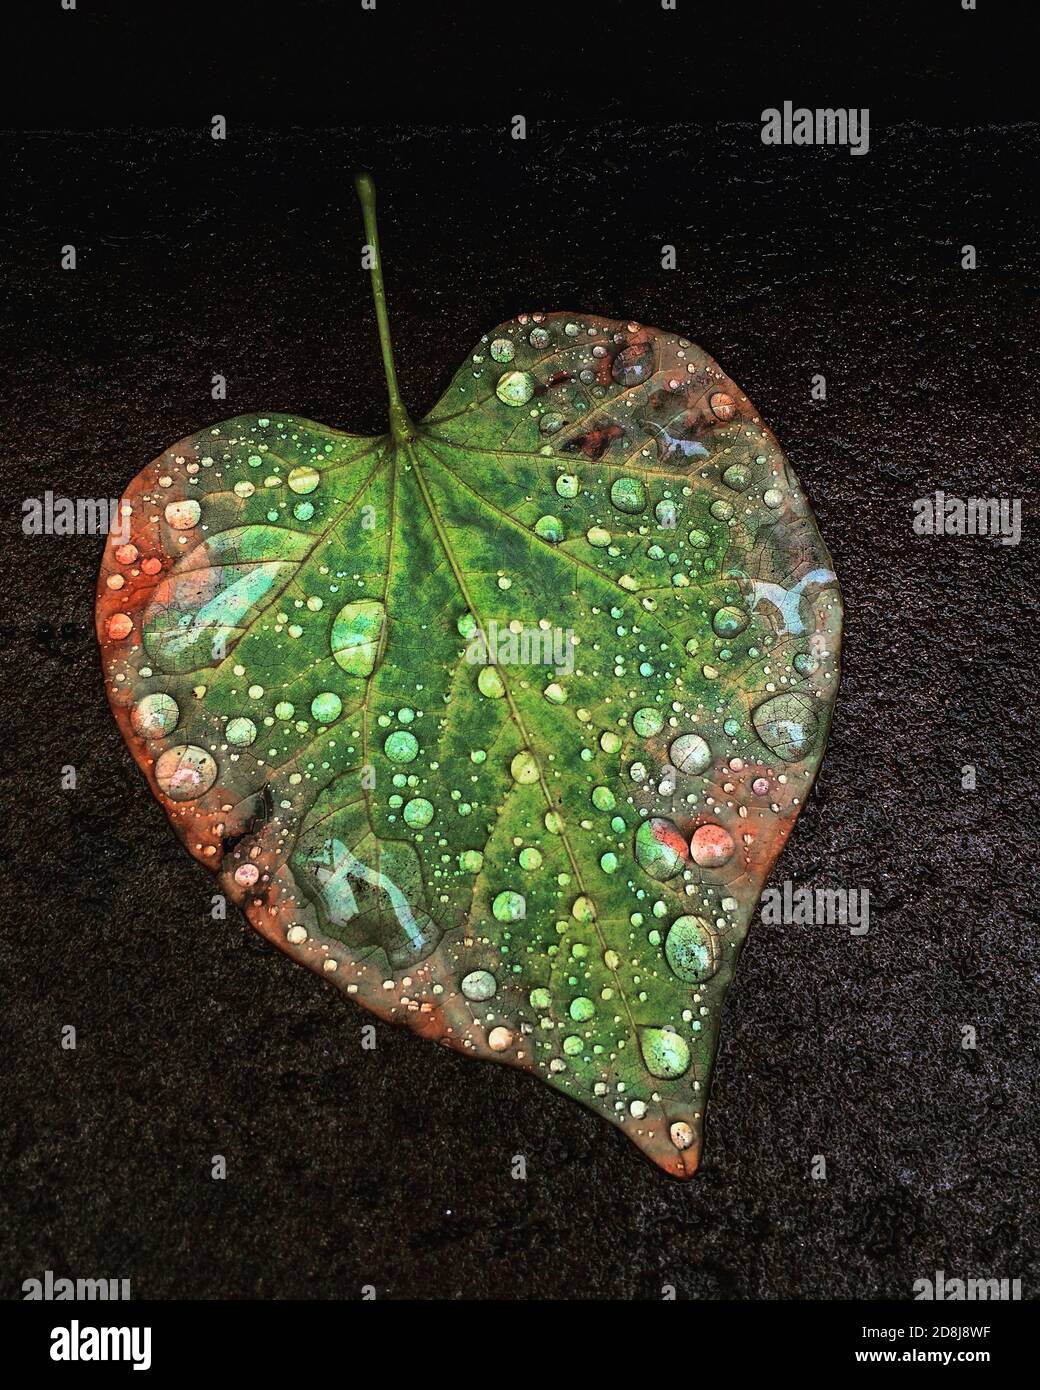 Heart-Shaped Leaf with Water Droplets Stock Photo